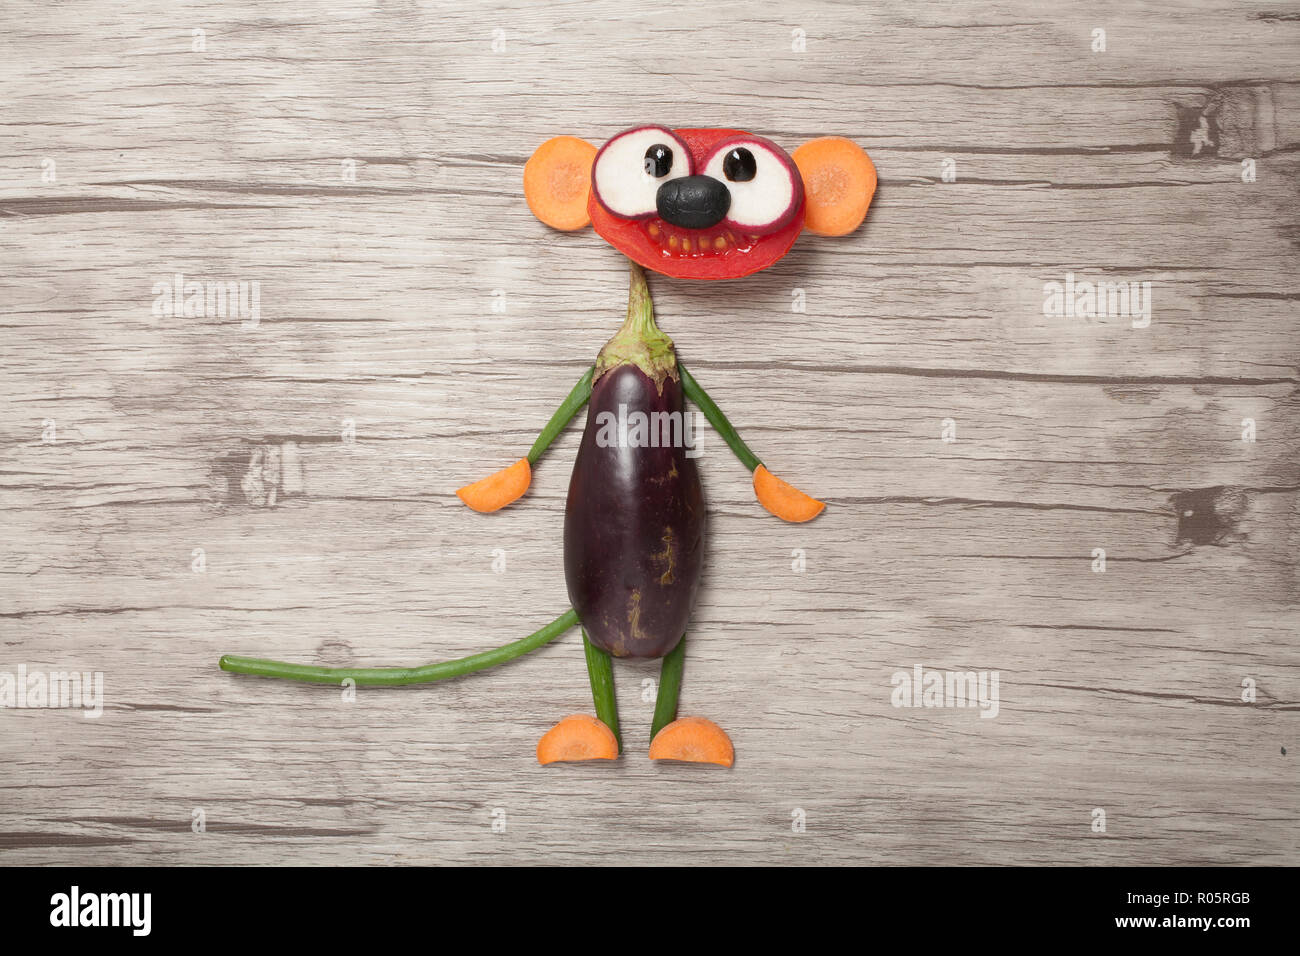 Funny vegetable suricate made on wooden background Stock Photo